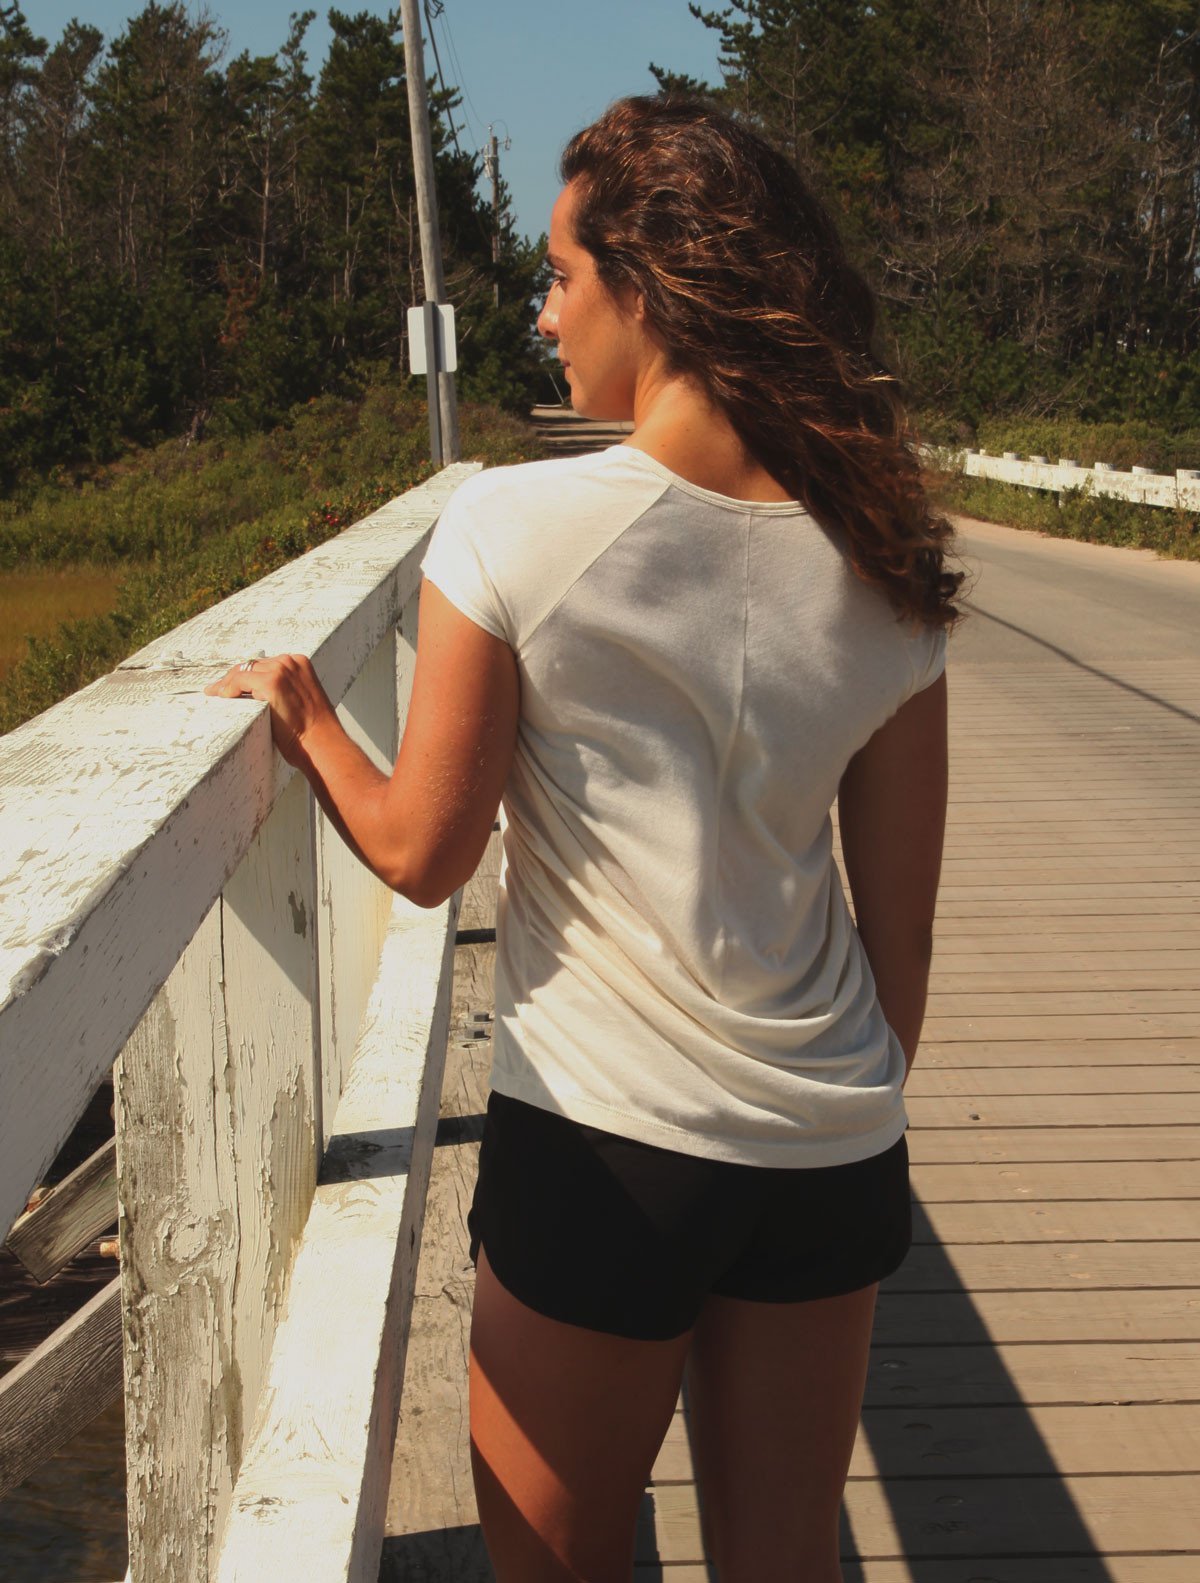 Back view of model wearing simulacra's Draped back T-shirt in natural paired with shorts on bridge.